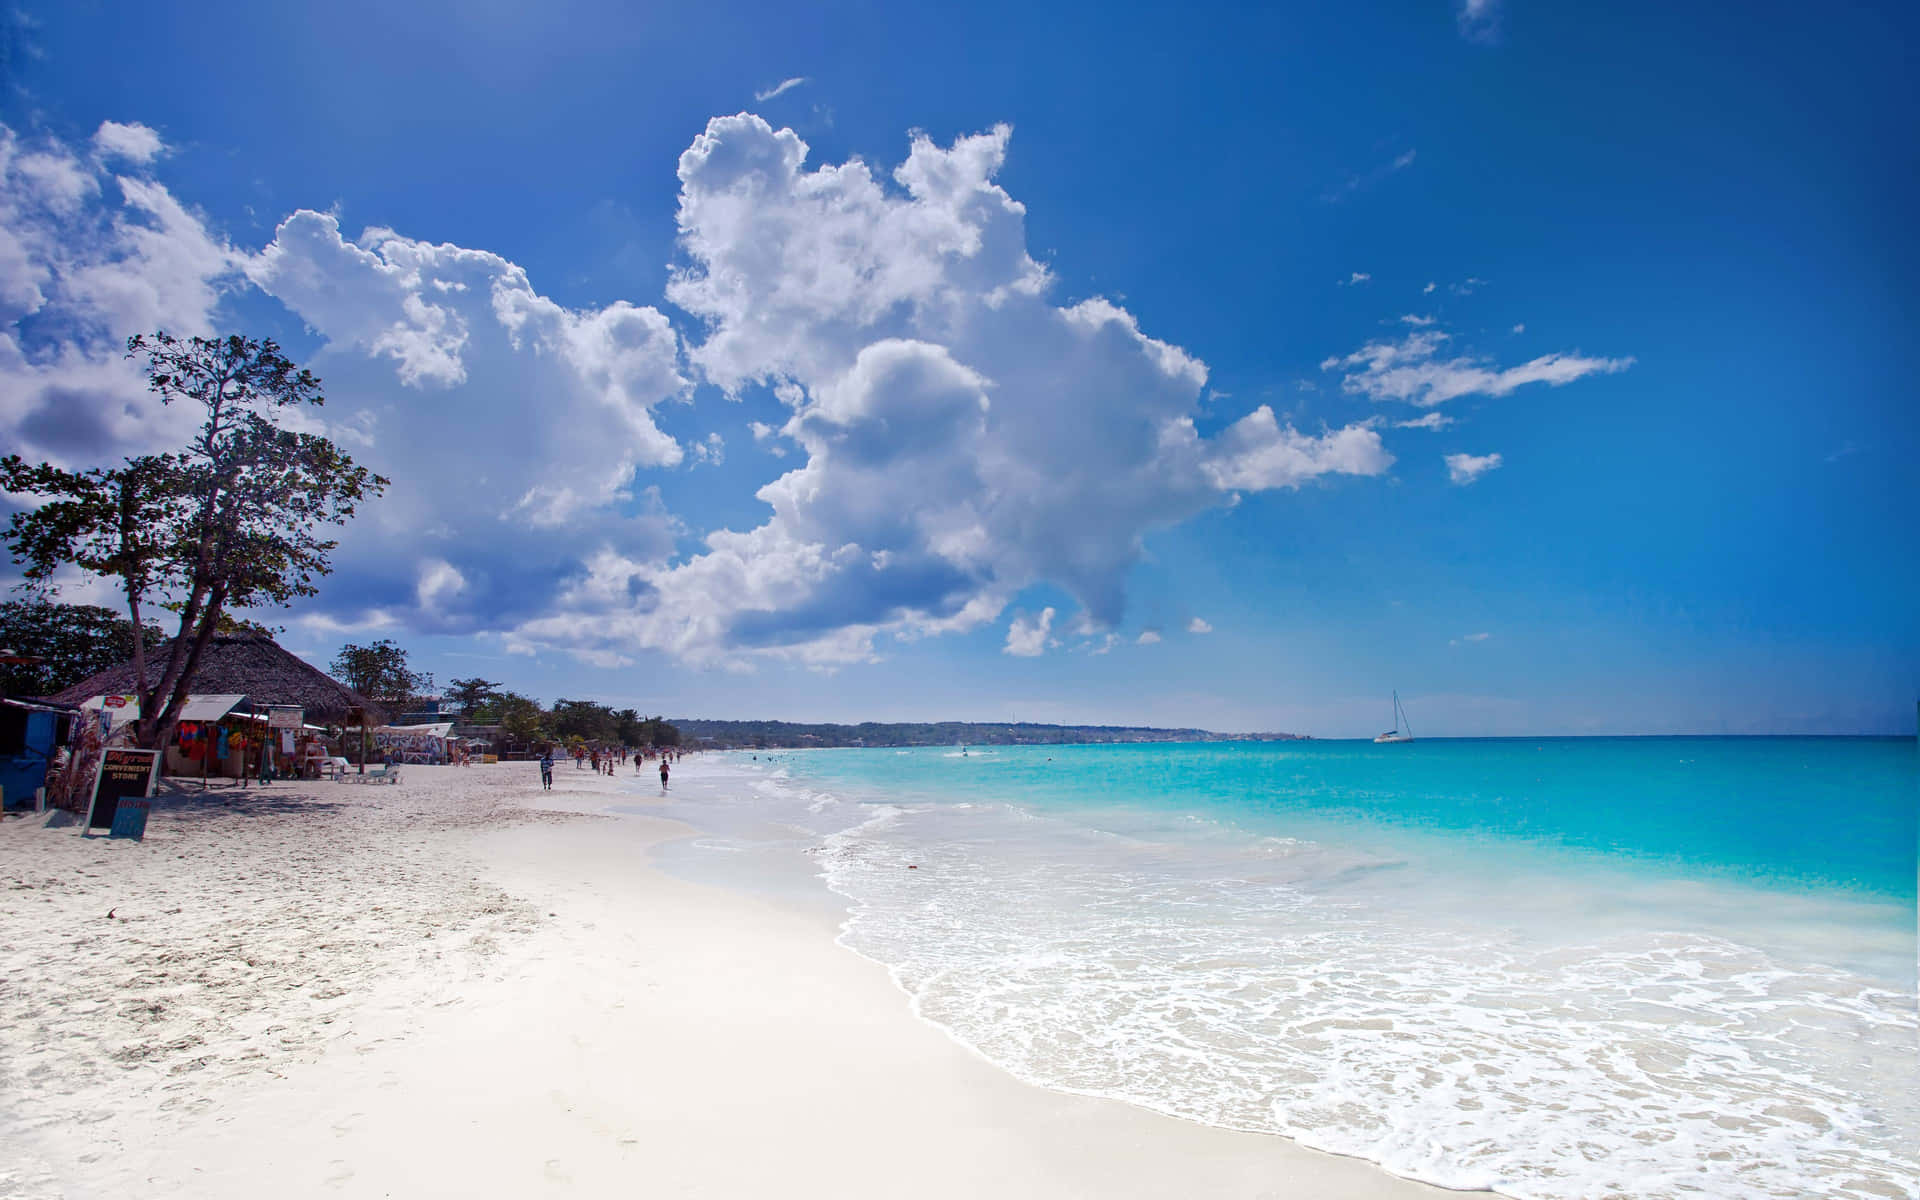 A beach in Jamaica that invites you to relax and enjoy the natural beauty